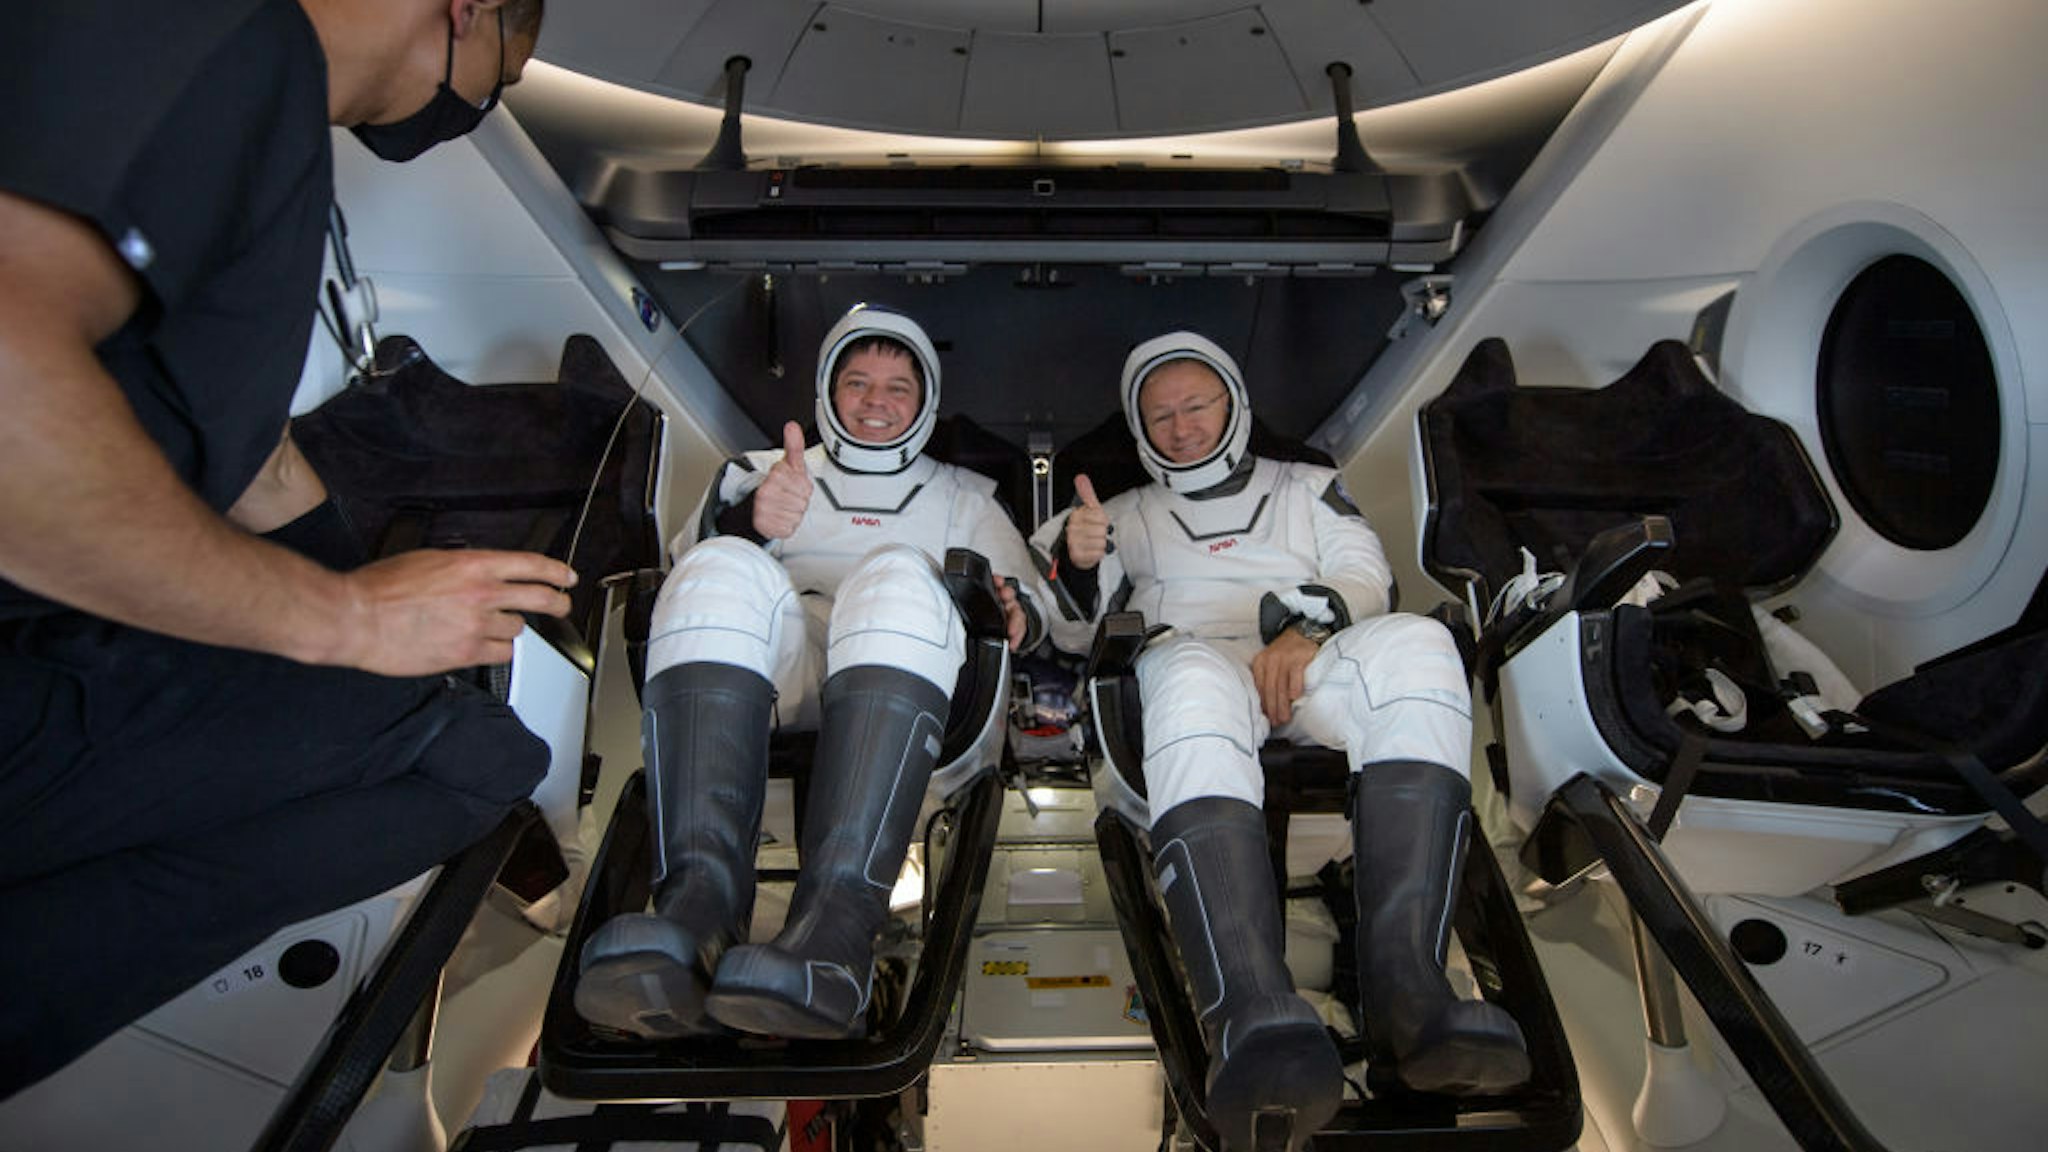 In this handout image provided by NASA, NASA astronauts Robert Behnken (L) and Douglas Hurley are seen inside the SpaceX Crew Dragon capsule spacecraft which landed in the Gulf of Mexico after completing the Demo-2 mission to the International Space Station on August 2, 2020 off the coast of Pensacola, Florida. The Demo-2 mission is the first launch with astronauts of the SpaceX Crew Dragon spacecraft and Falcon 9 rocket to the International Space Station as part of the agency's Commercial Crew Program. The test flight serves as an end-to-end demonstration of SpaceXs crew transportation system. Behnken and Hurley launched at 3:22 p.m. EDT on Saturday, May 30, from Launch Complex 39A at the Kennedy Space Center. A new era of human spaceflight is set to begin as American astronauts once again launch on an American rocket from American soil to low-Earth orbit for the first time since the conclusion of the Space Shuttle Program in 2011. (Photo by Bill Ingalls/NASA via Getty Images)